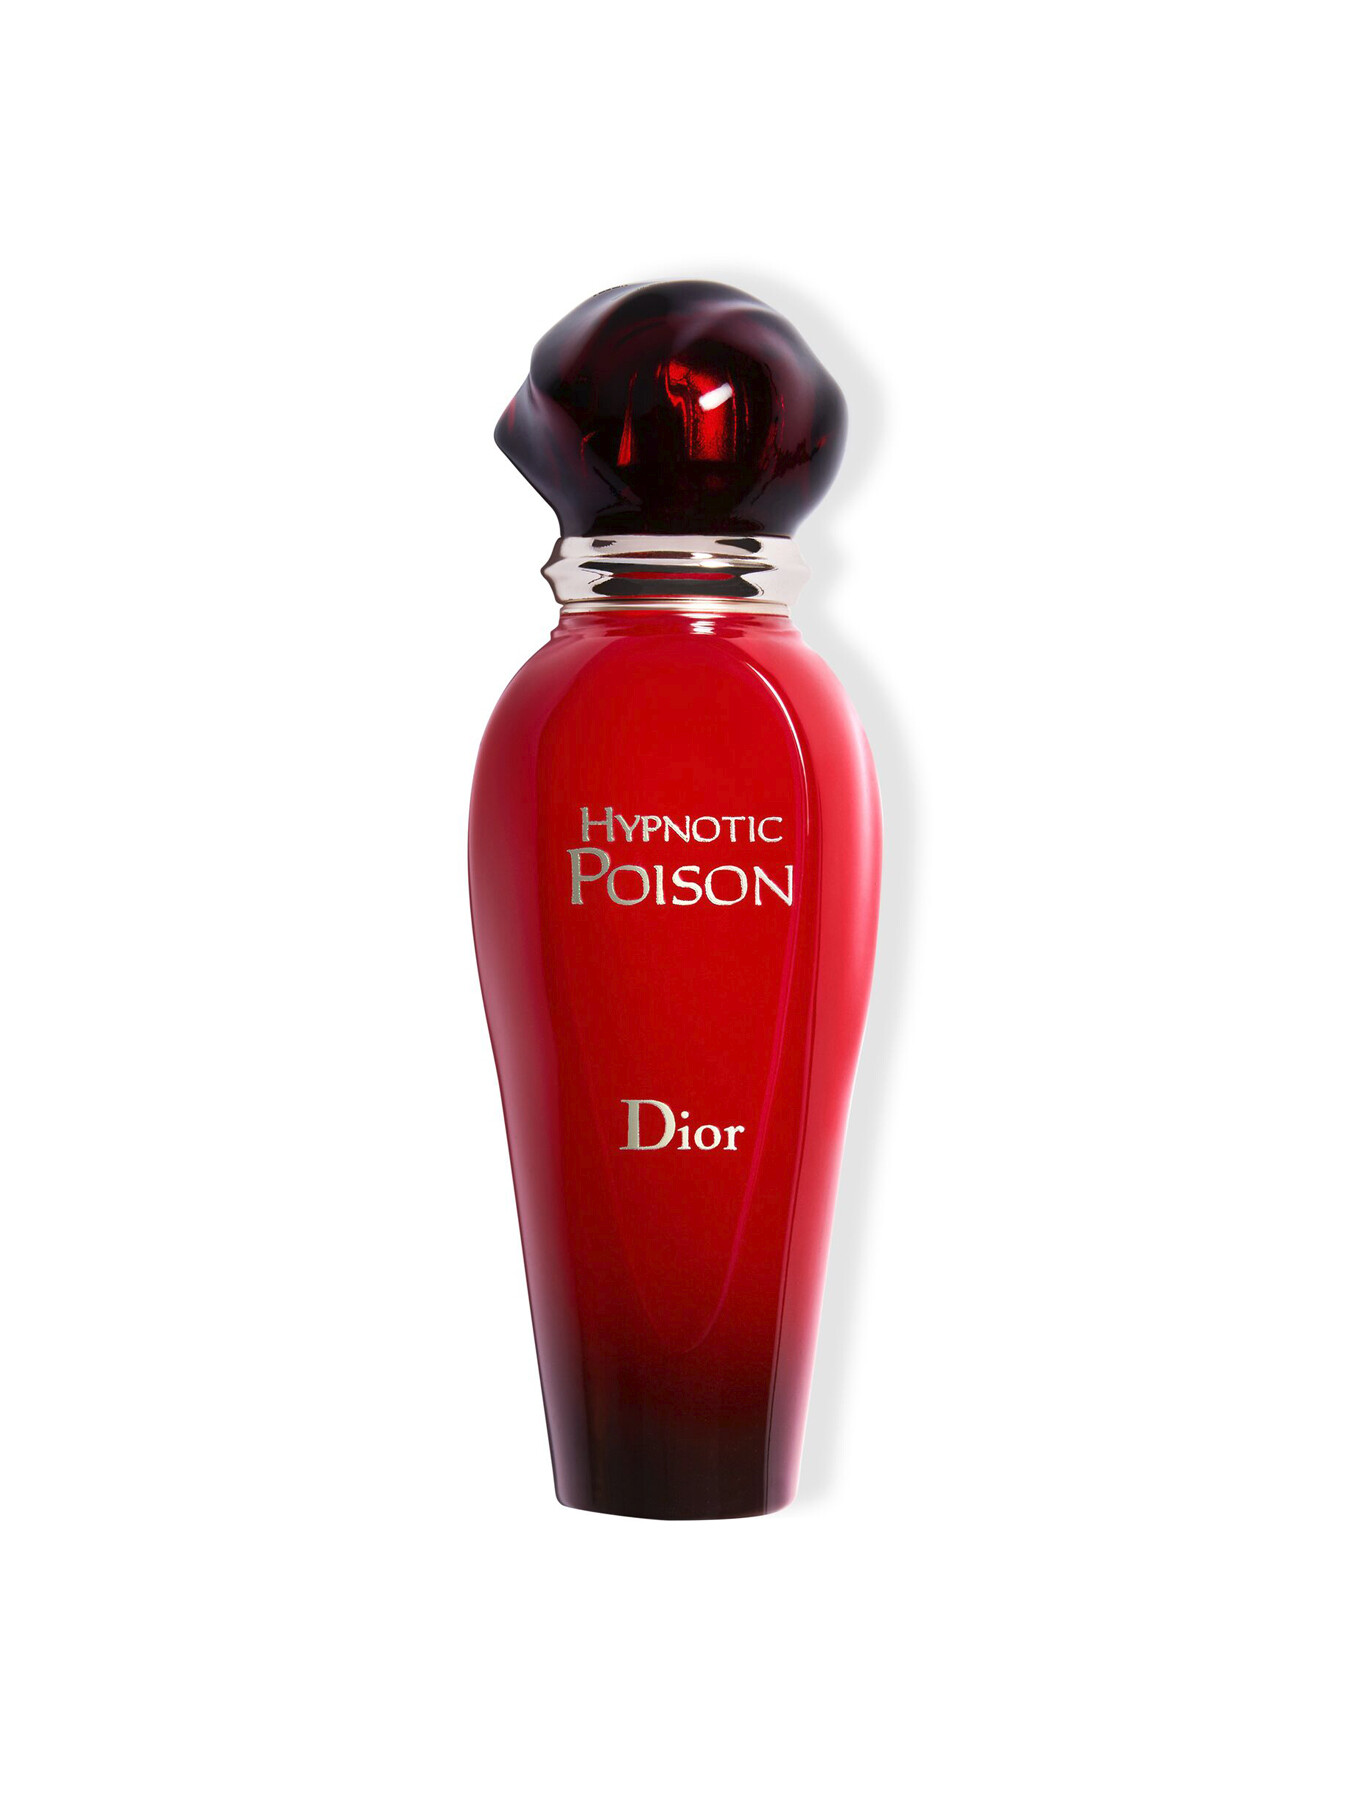 Popular Christian Dior Hypnotic Poison EDT for Women 30ml50ml100ml150ml  Perfume  Cologne Collection Singapore